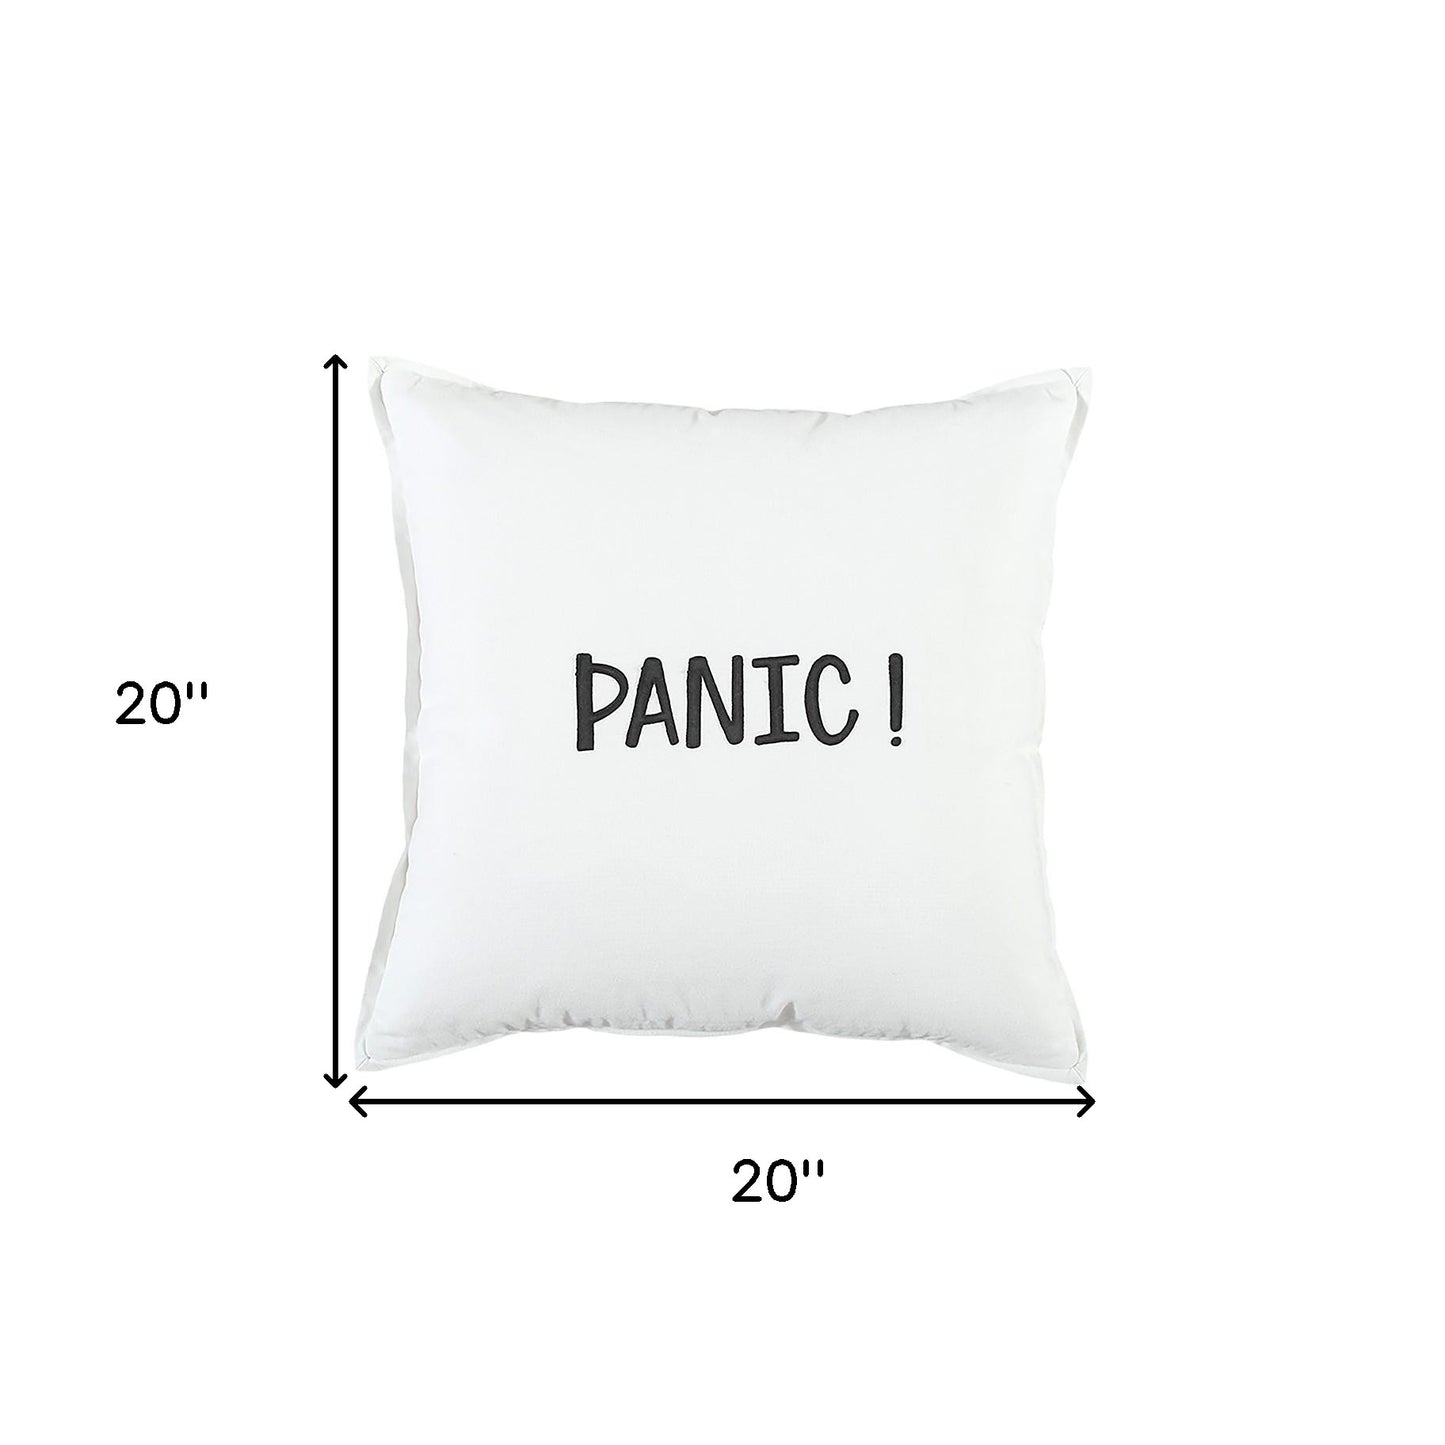 Black and White Flagship Message Throw Pillow